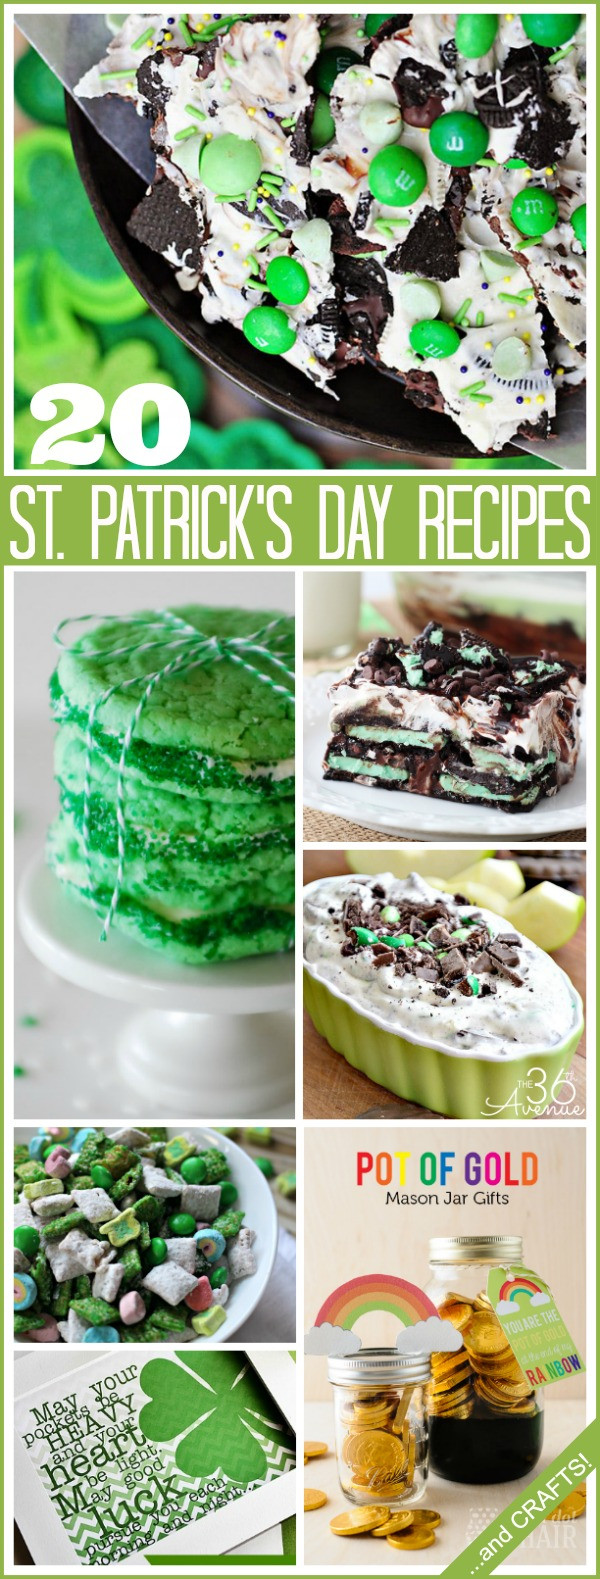 St Patrick's Day Snack Ideas
 The 36th AVENUE